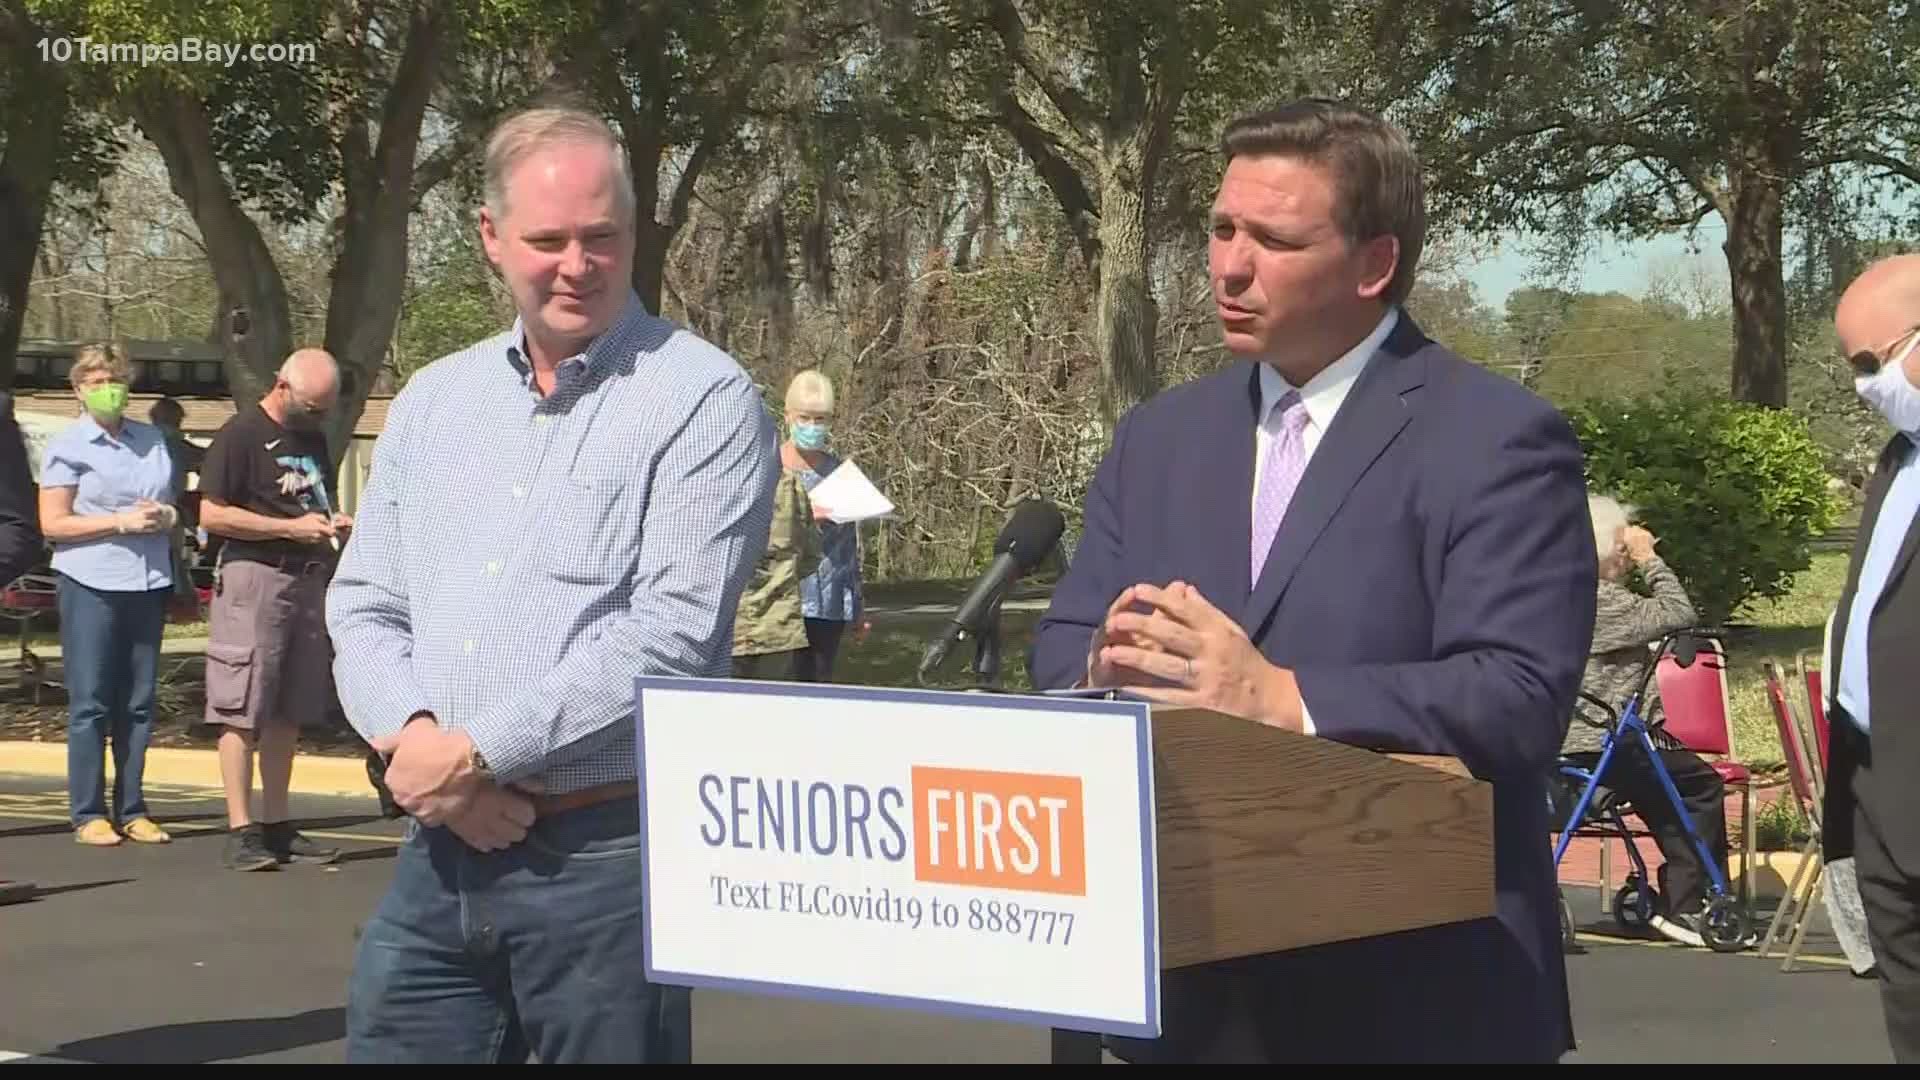 Florida Gov. Ron DeSantis continues to face criticism after a decision last week to vaccinate 3,000 people in a wealthy and predominately white community in Manatee